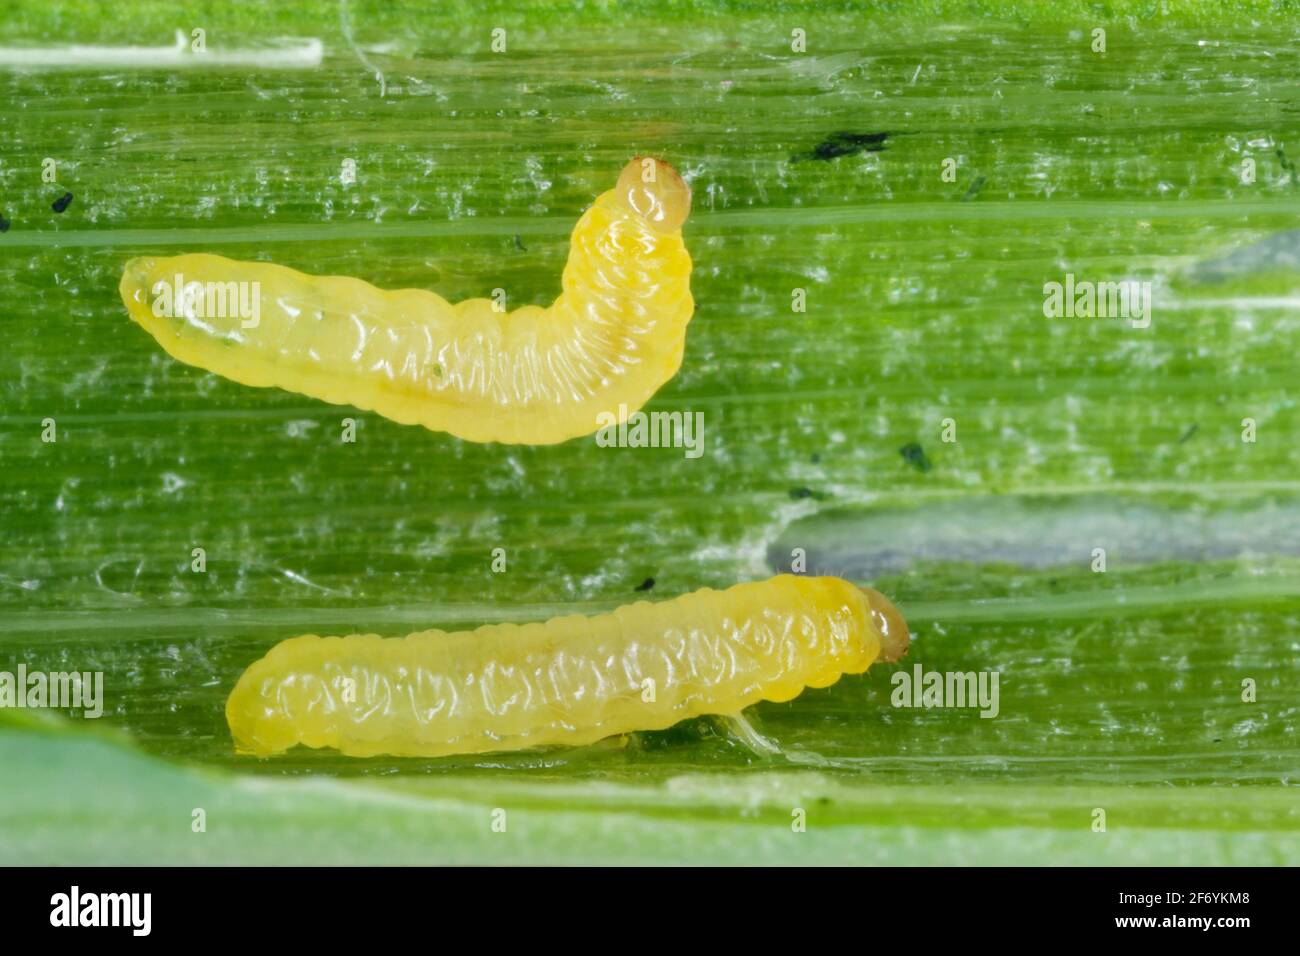 Caterpillar of leek moth or onion leaf miner Acrolepiopsis assectella family Acrolepiidae. It is Invasive species a pest of leek crops. Larvae feed on Stock Photo